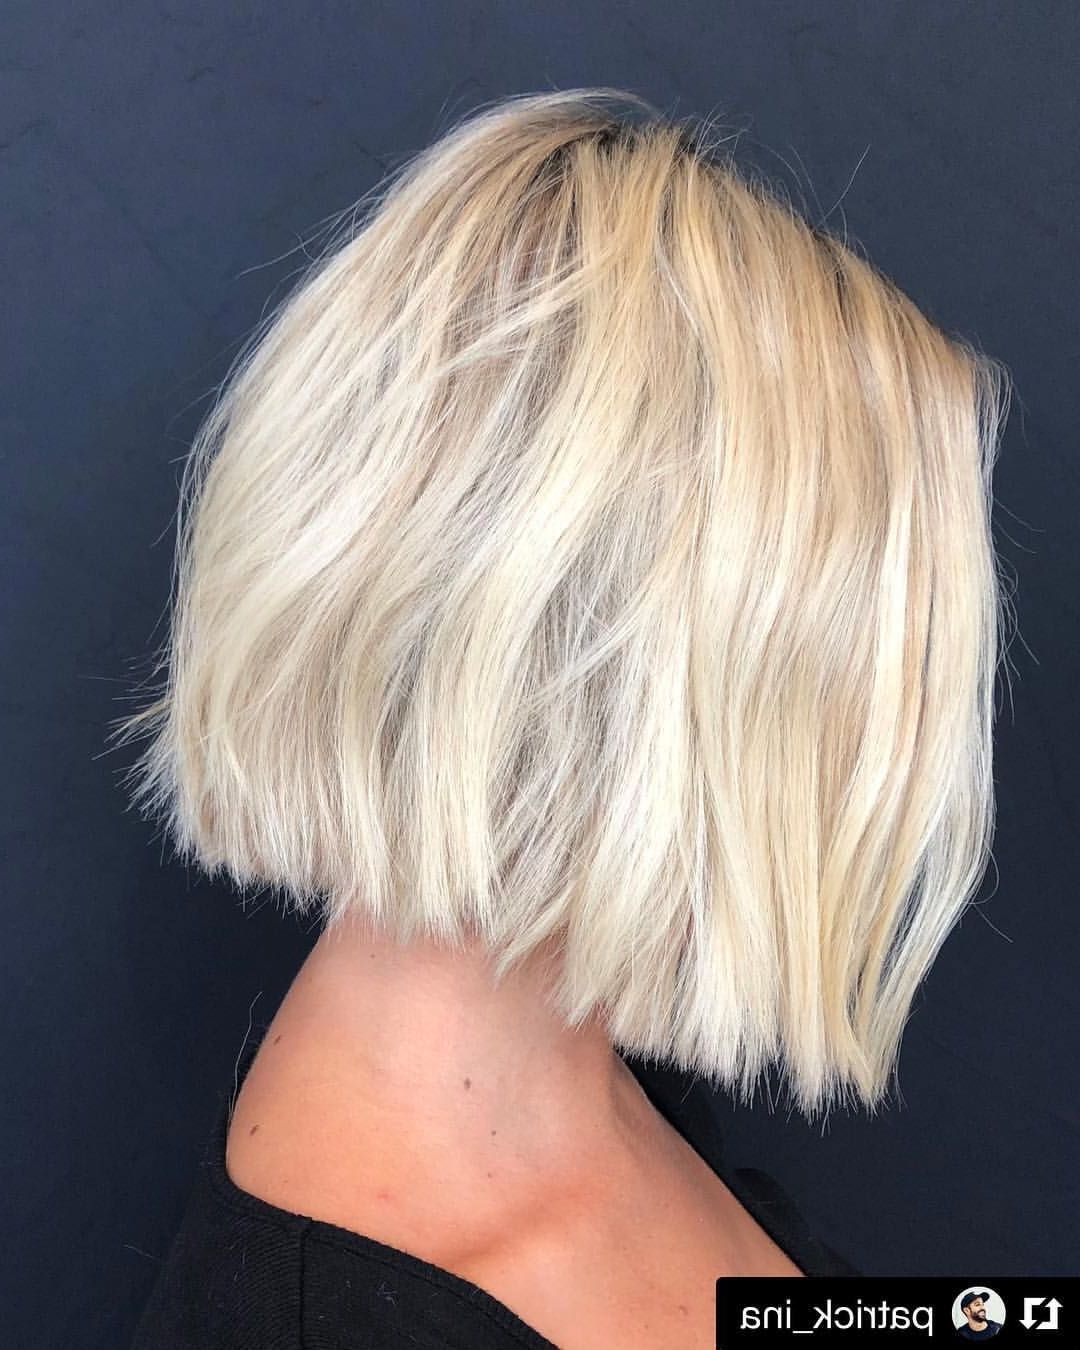 Repost @patrick Ina With @get Repost ・・・ Soft Textured Bob Pertaining To Dynamic Tousled Blonde Bob Hairstyles With Dark Underlayer (View 16 of 20)